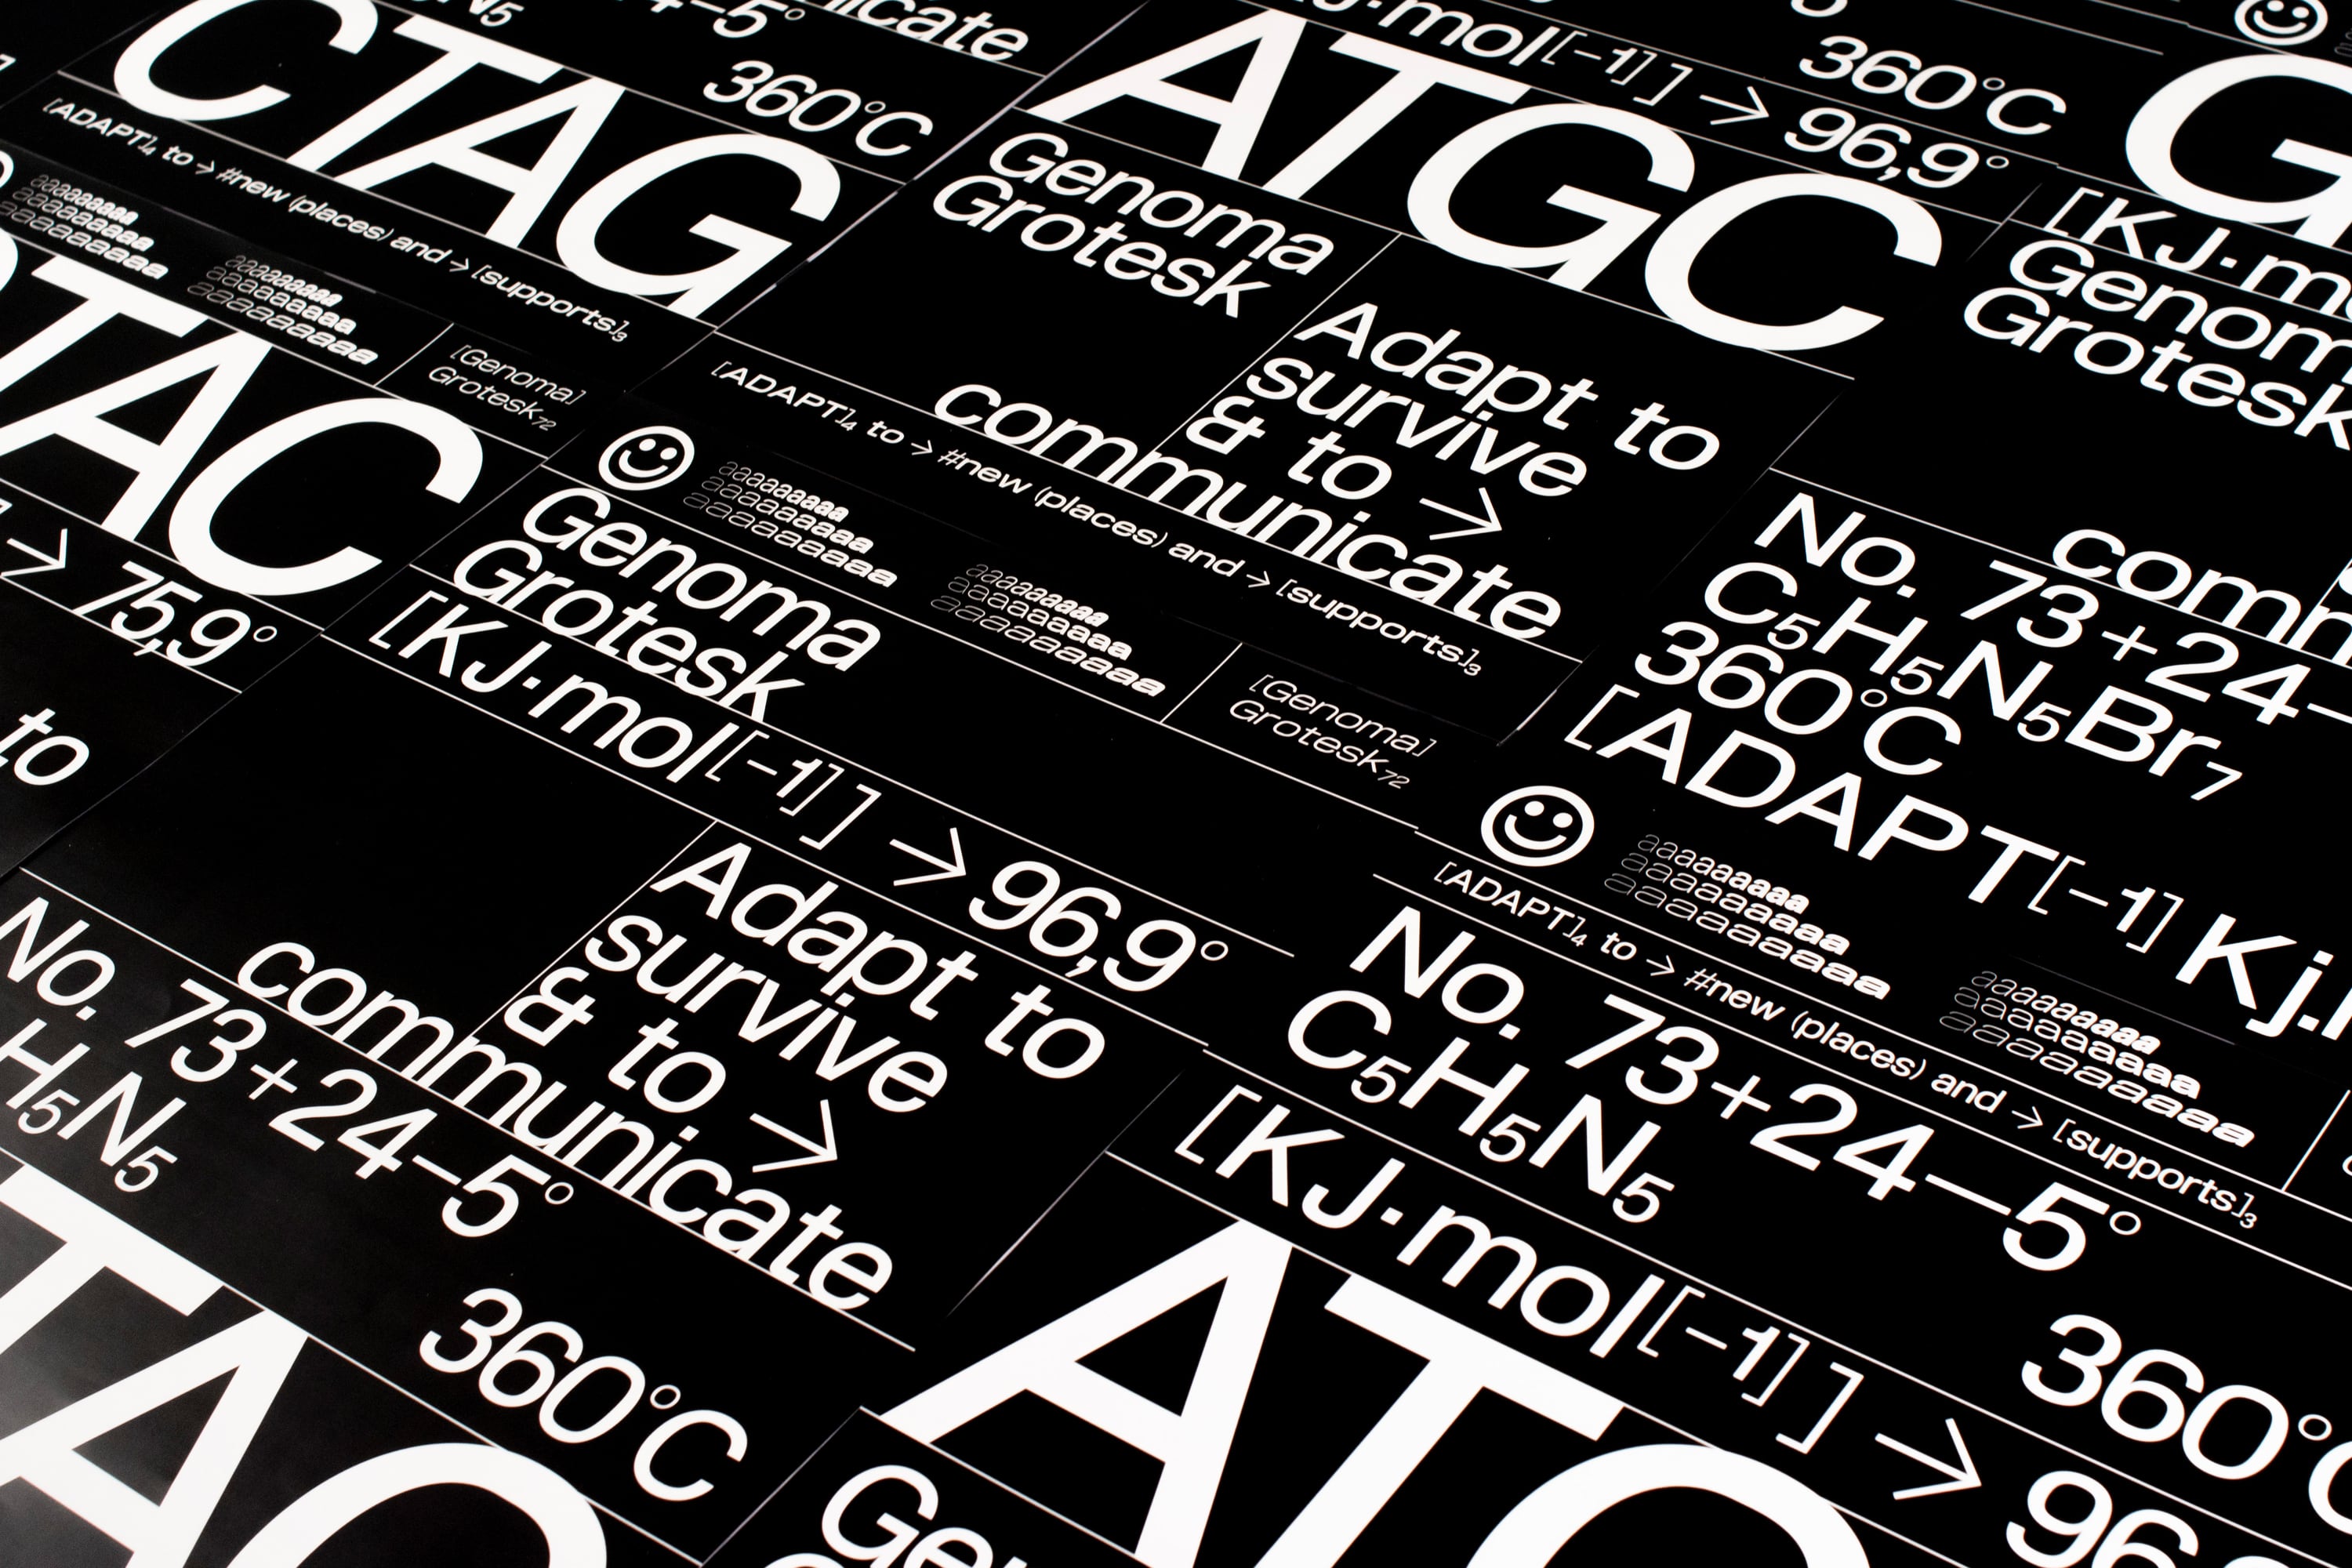 2019_Genoma_Grotesk_-_Static_typography_is_over__Poster_6